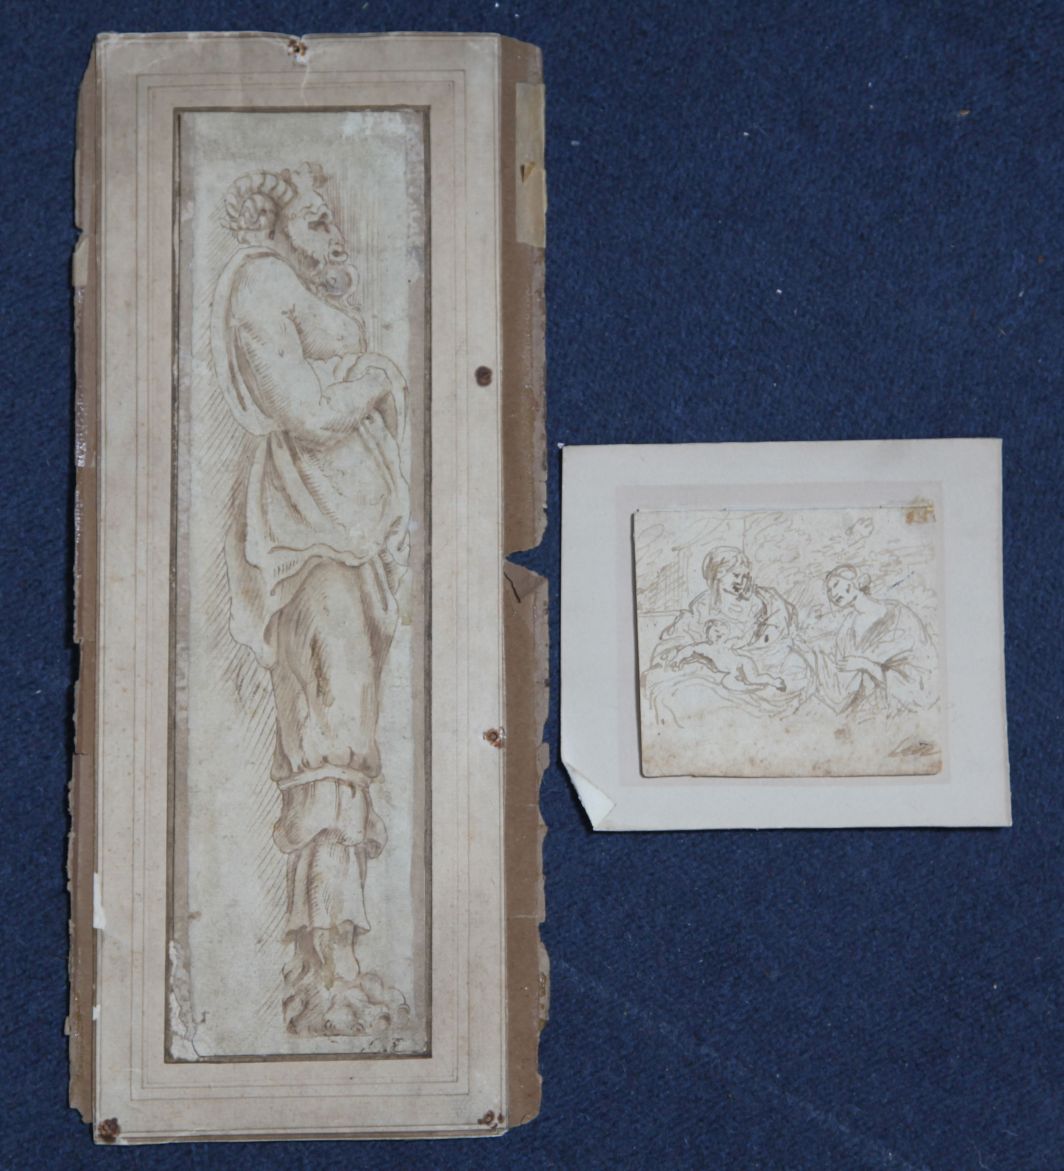 Old Master2 pen and ink drawings,Bacchic figure, inscribed verso Ex. Collection Sir Joshua